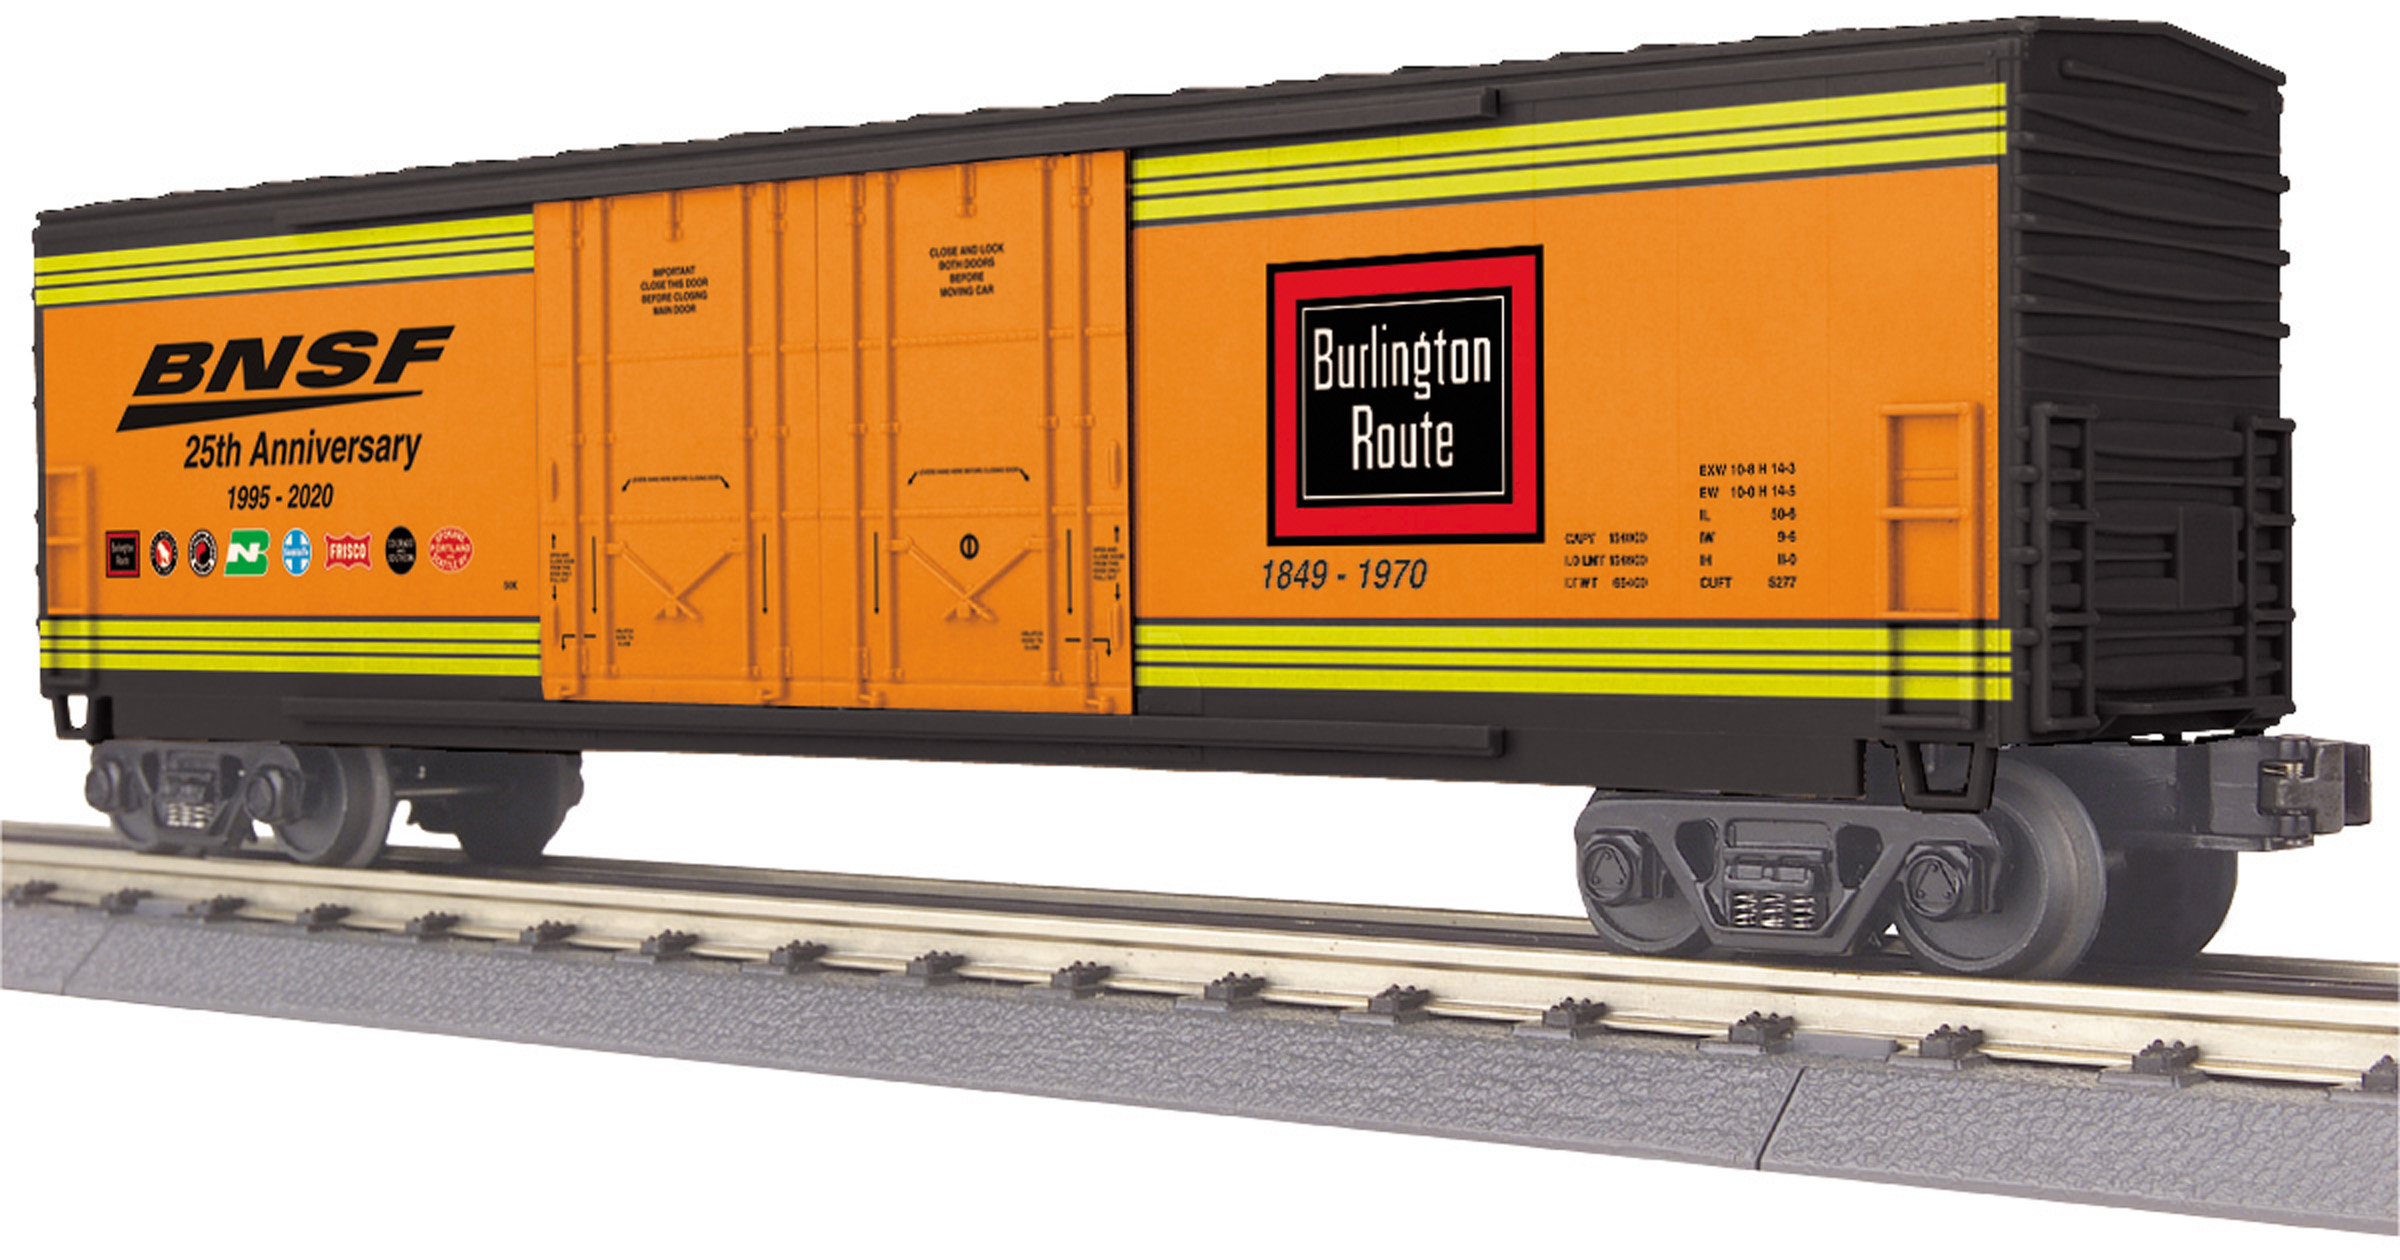 BNSF (25th Anniversary) 8-Car 50' Double Door Plugged Boxcar - Burlington Route image